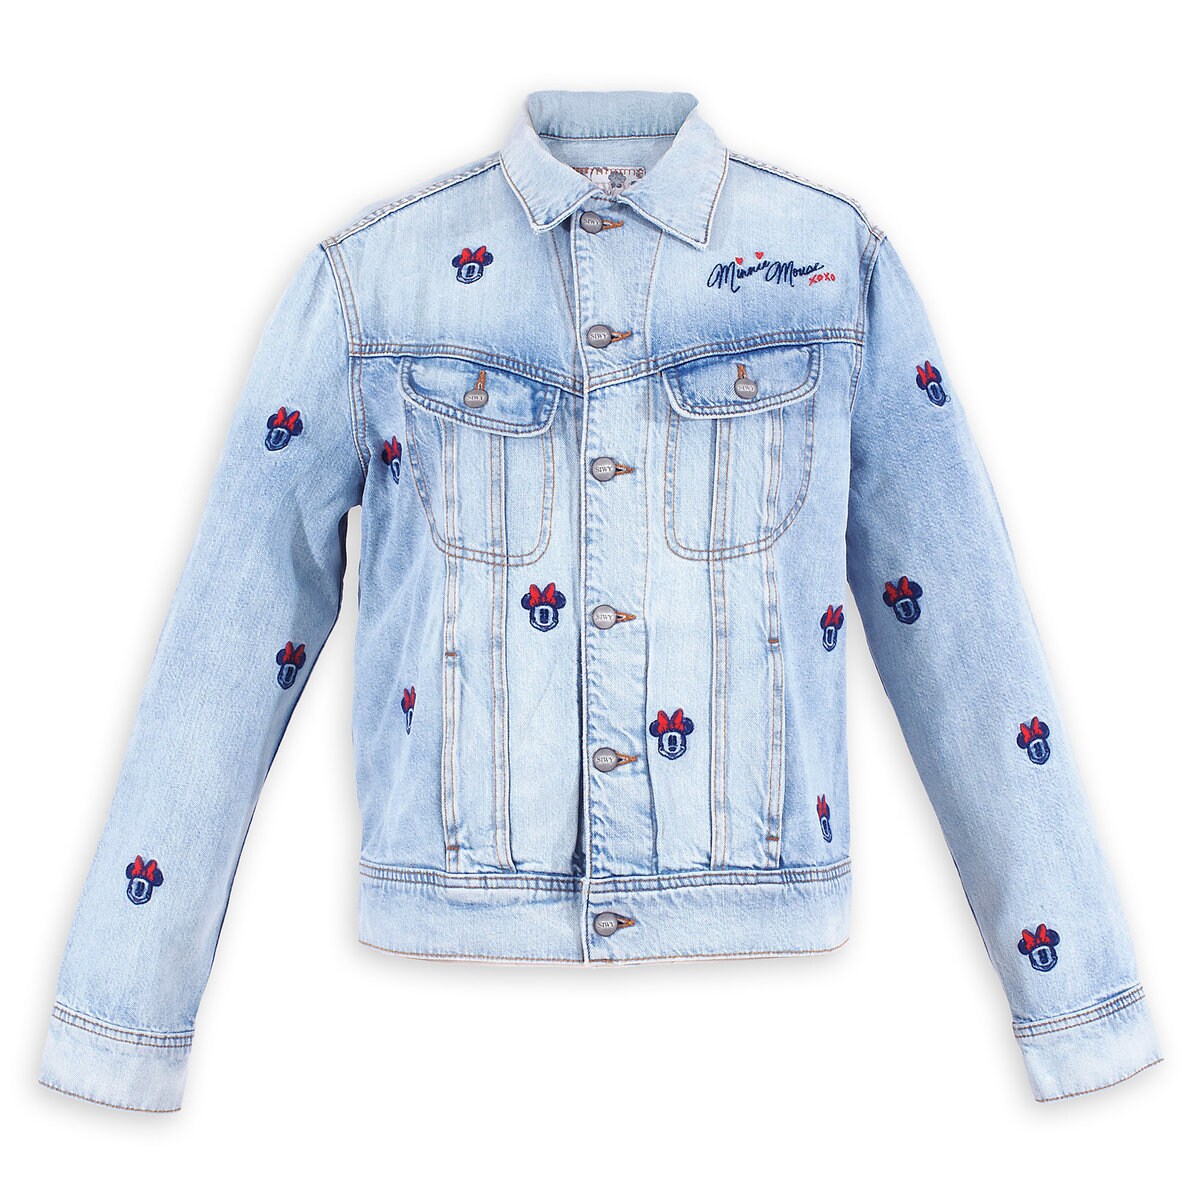 Minnie Mouse Embroidered Denim Jacket by SIWY